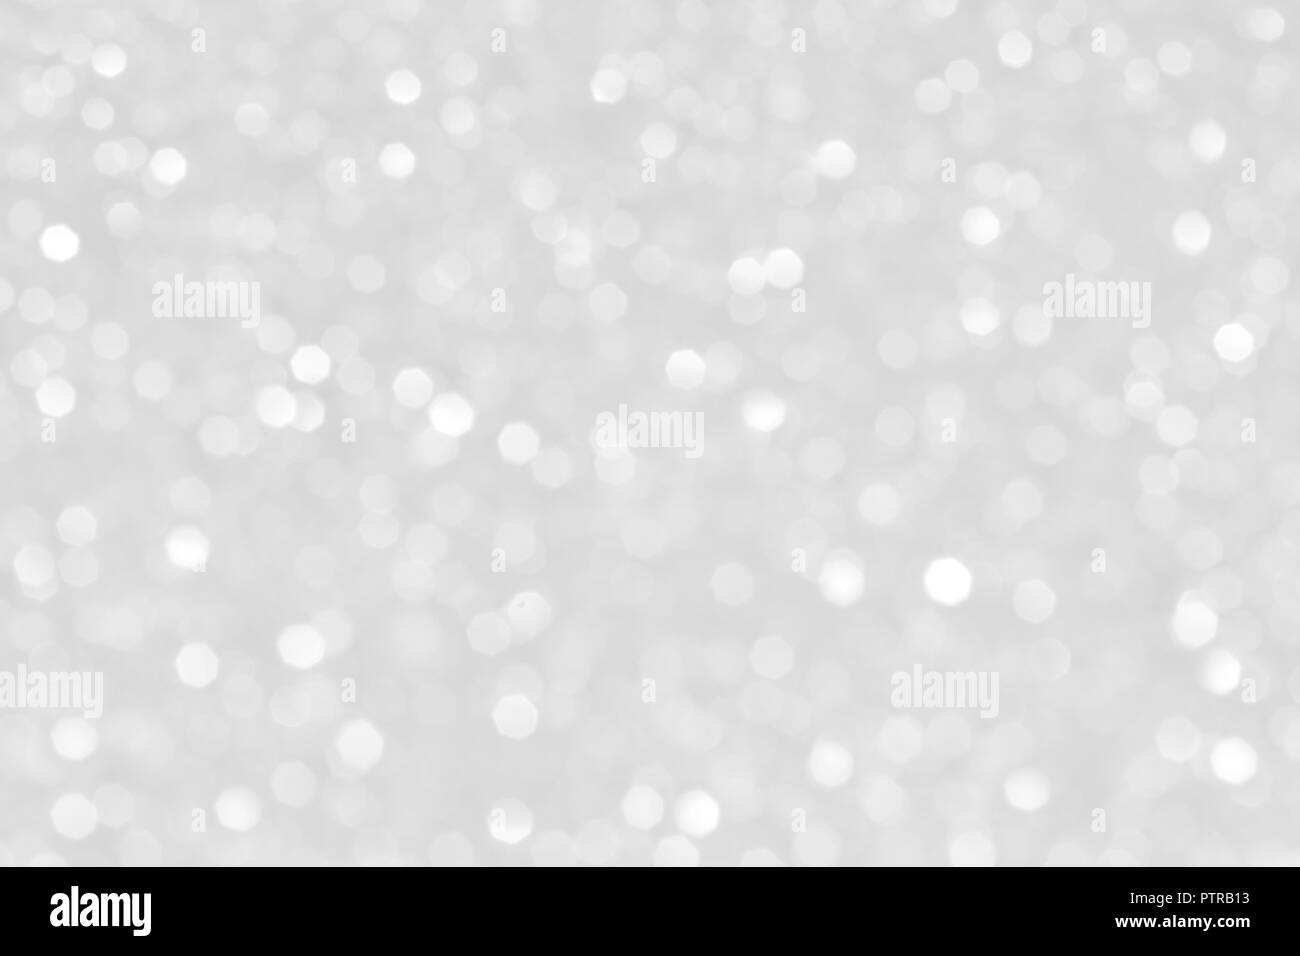 White Abstract Defocused Lights Background Stock Photo